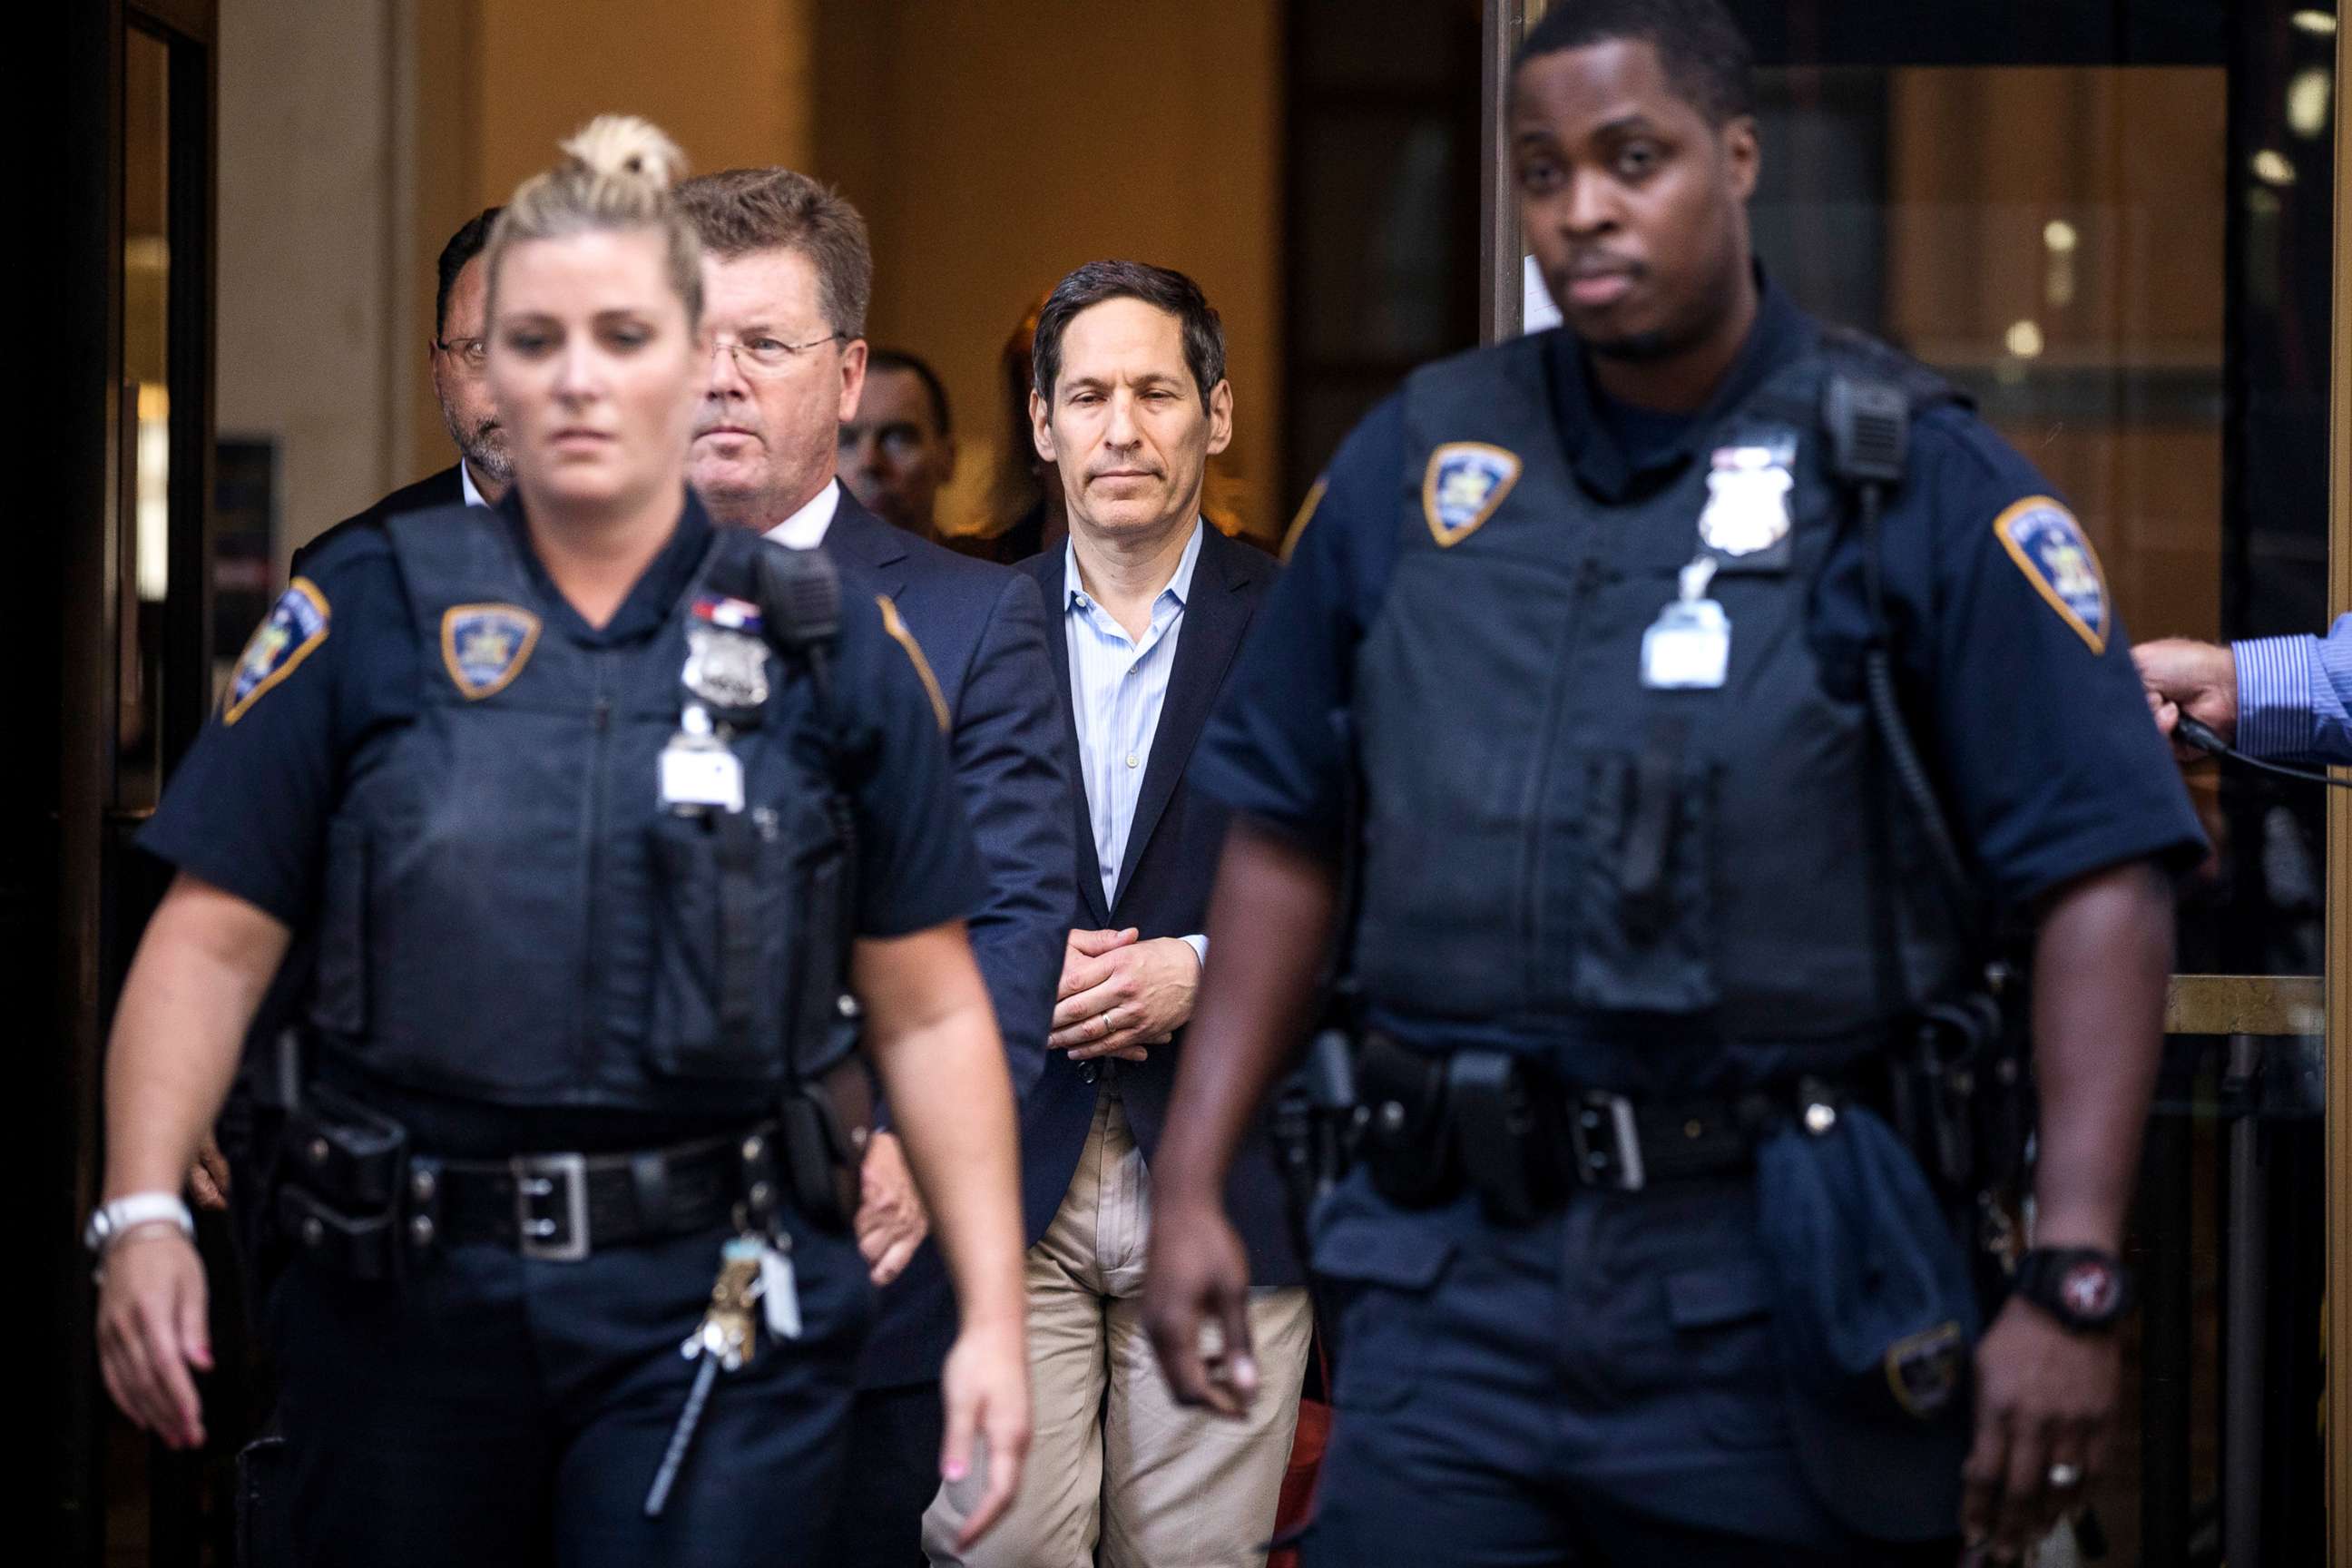 PHOTO: Tom Frieden (center), former Director of the Centers for Disease Control and Prevention, exits Brooklyn Criminal Court following his arrest on sex abuse charges, Aug. 24, 2018, in New York City.